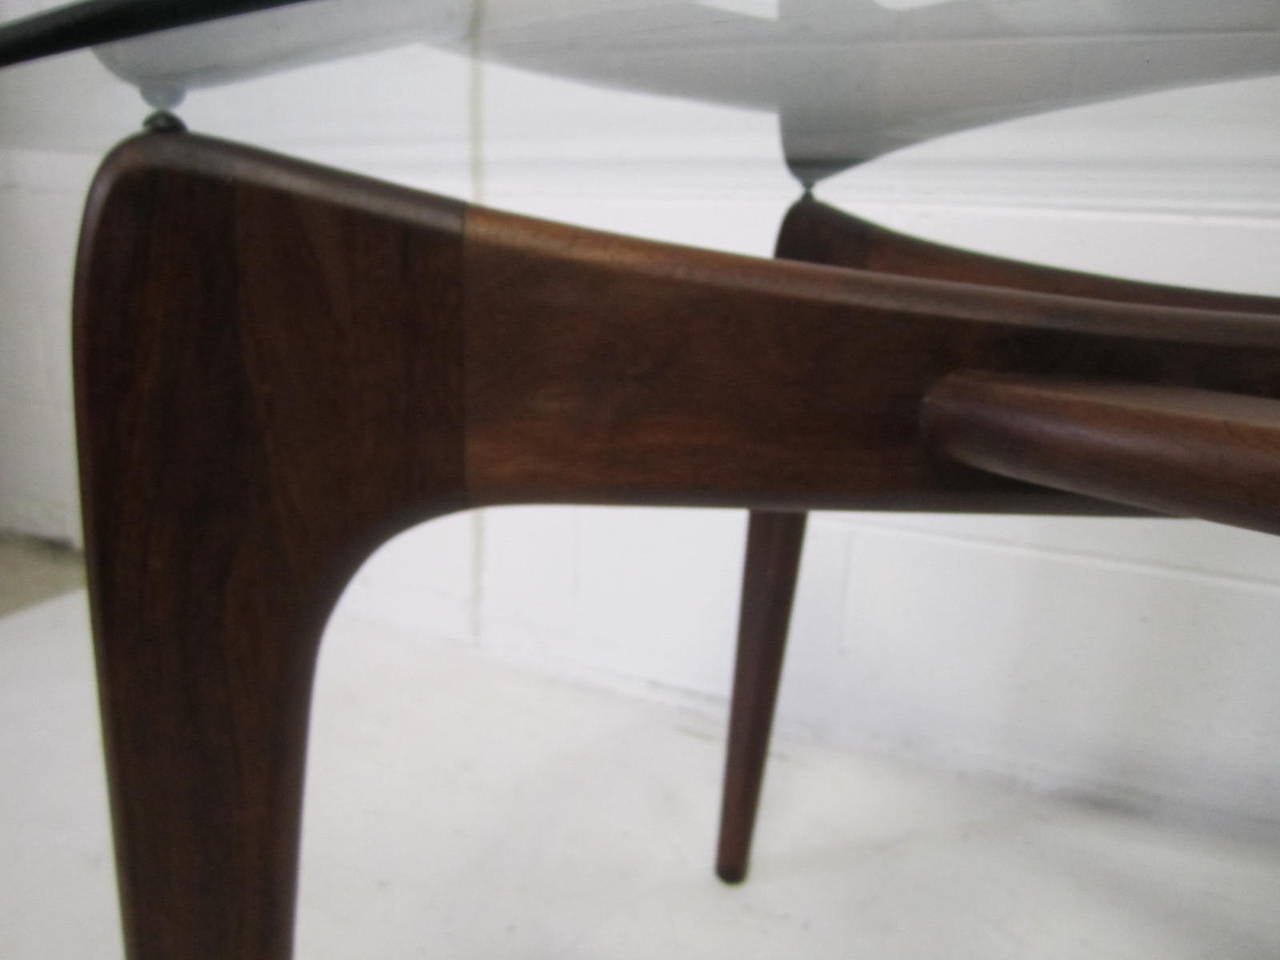 Stunning Adrian Pearsall large sculptural walnut dining table. A Mid-Century Modern dining table designed by Adrian Pearsall and made by Craft Associates. This wonderful piece is in excellent vintage condition, well taken care of for over 50+ years.